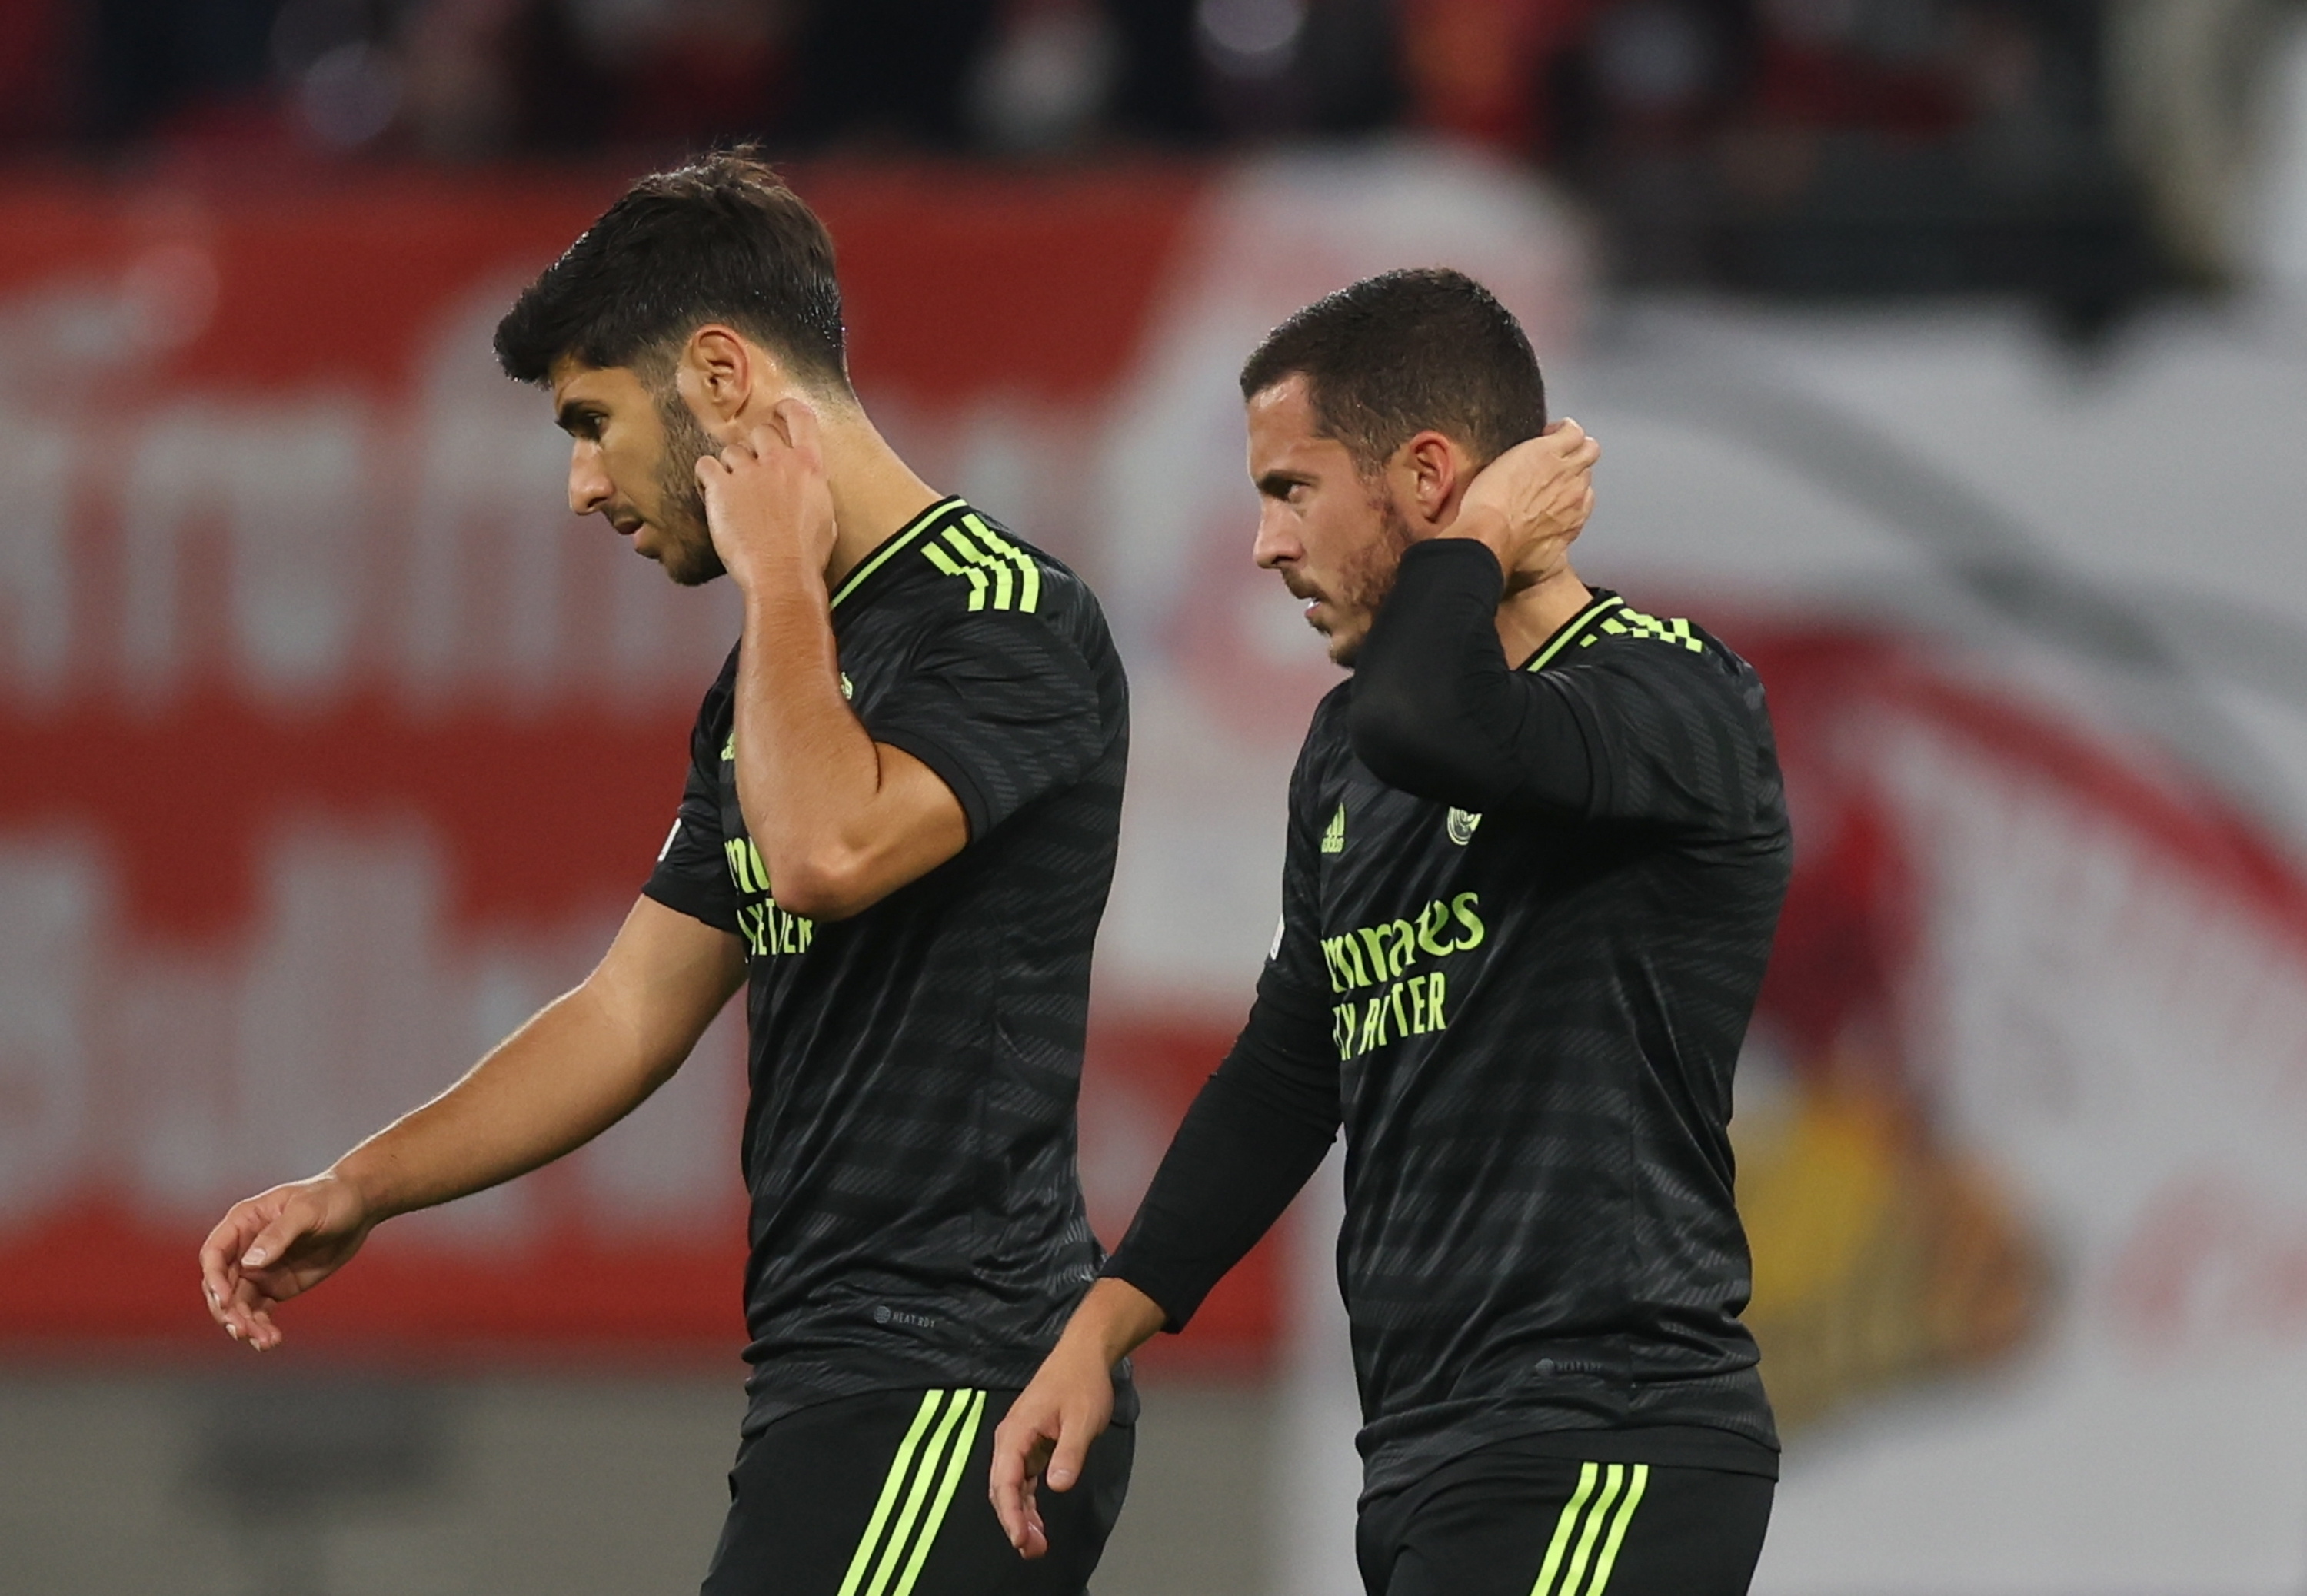 Hazard and Asensio, crestfallen after the defeat at the Red Bull Arena.